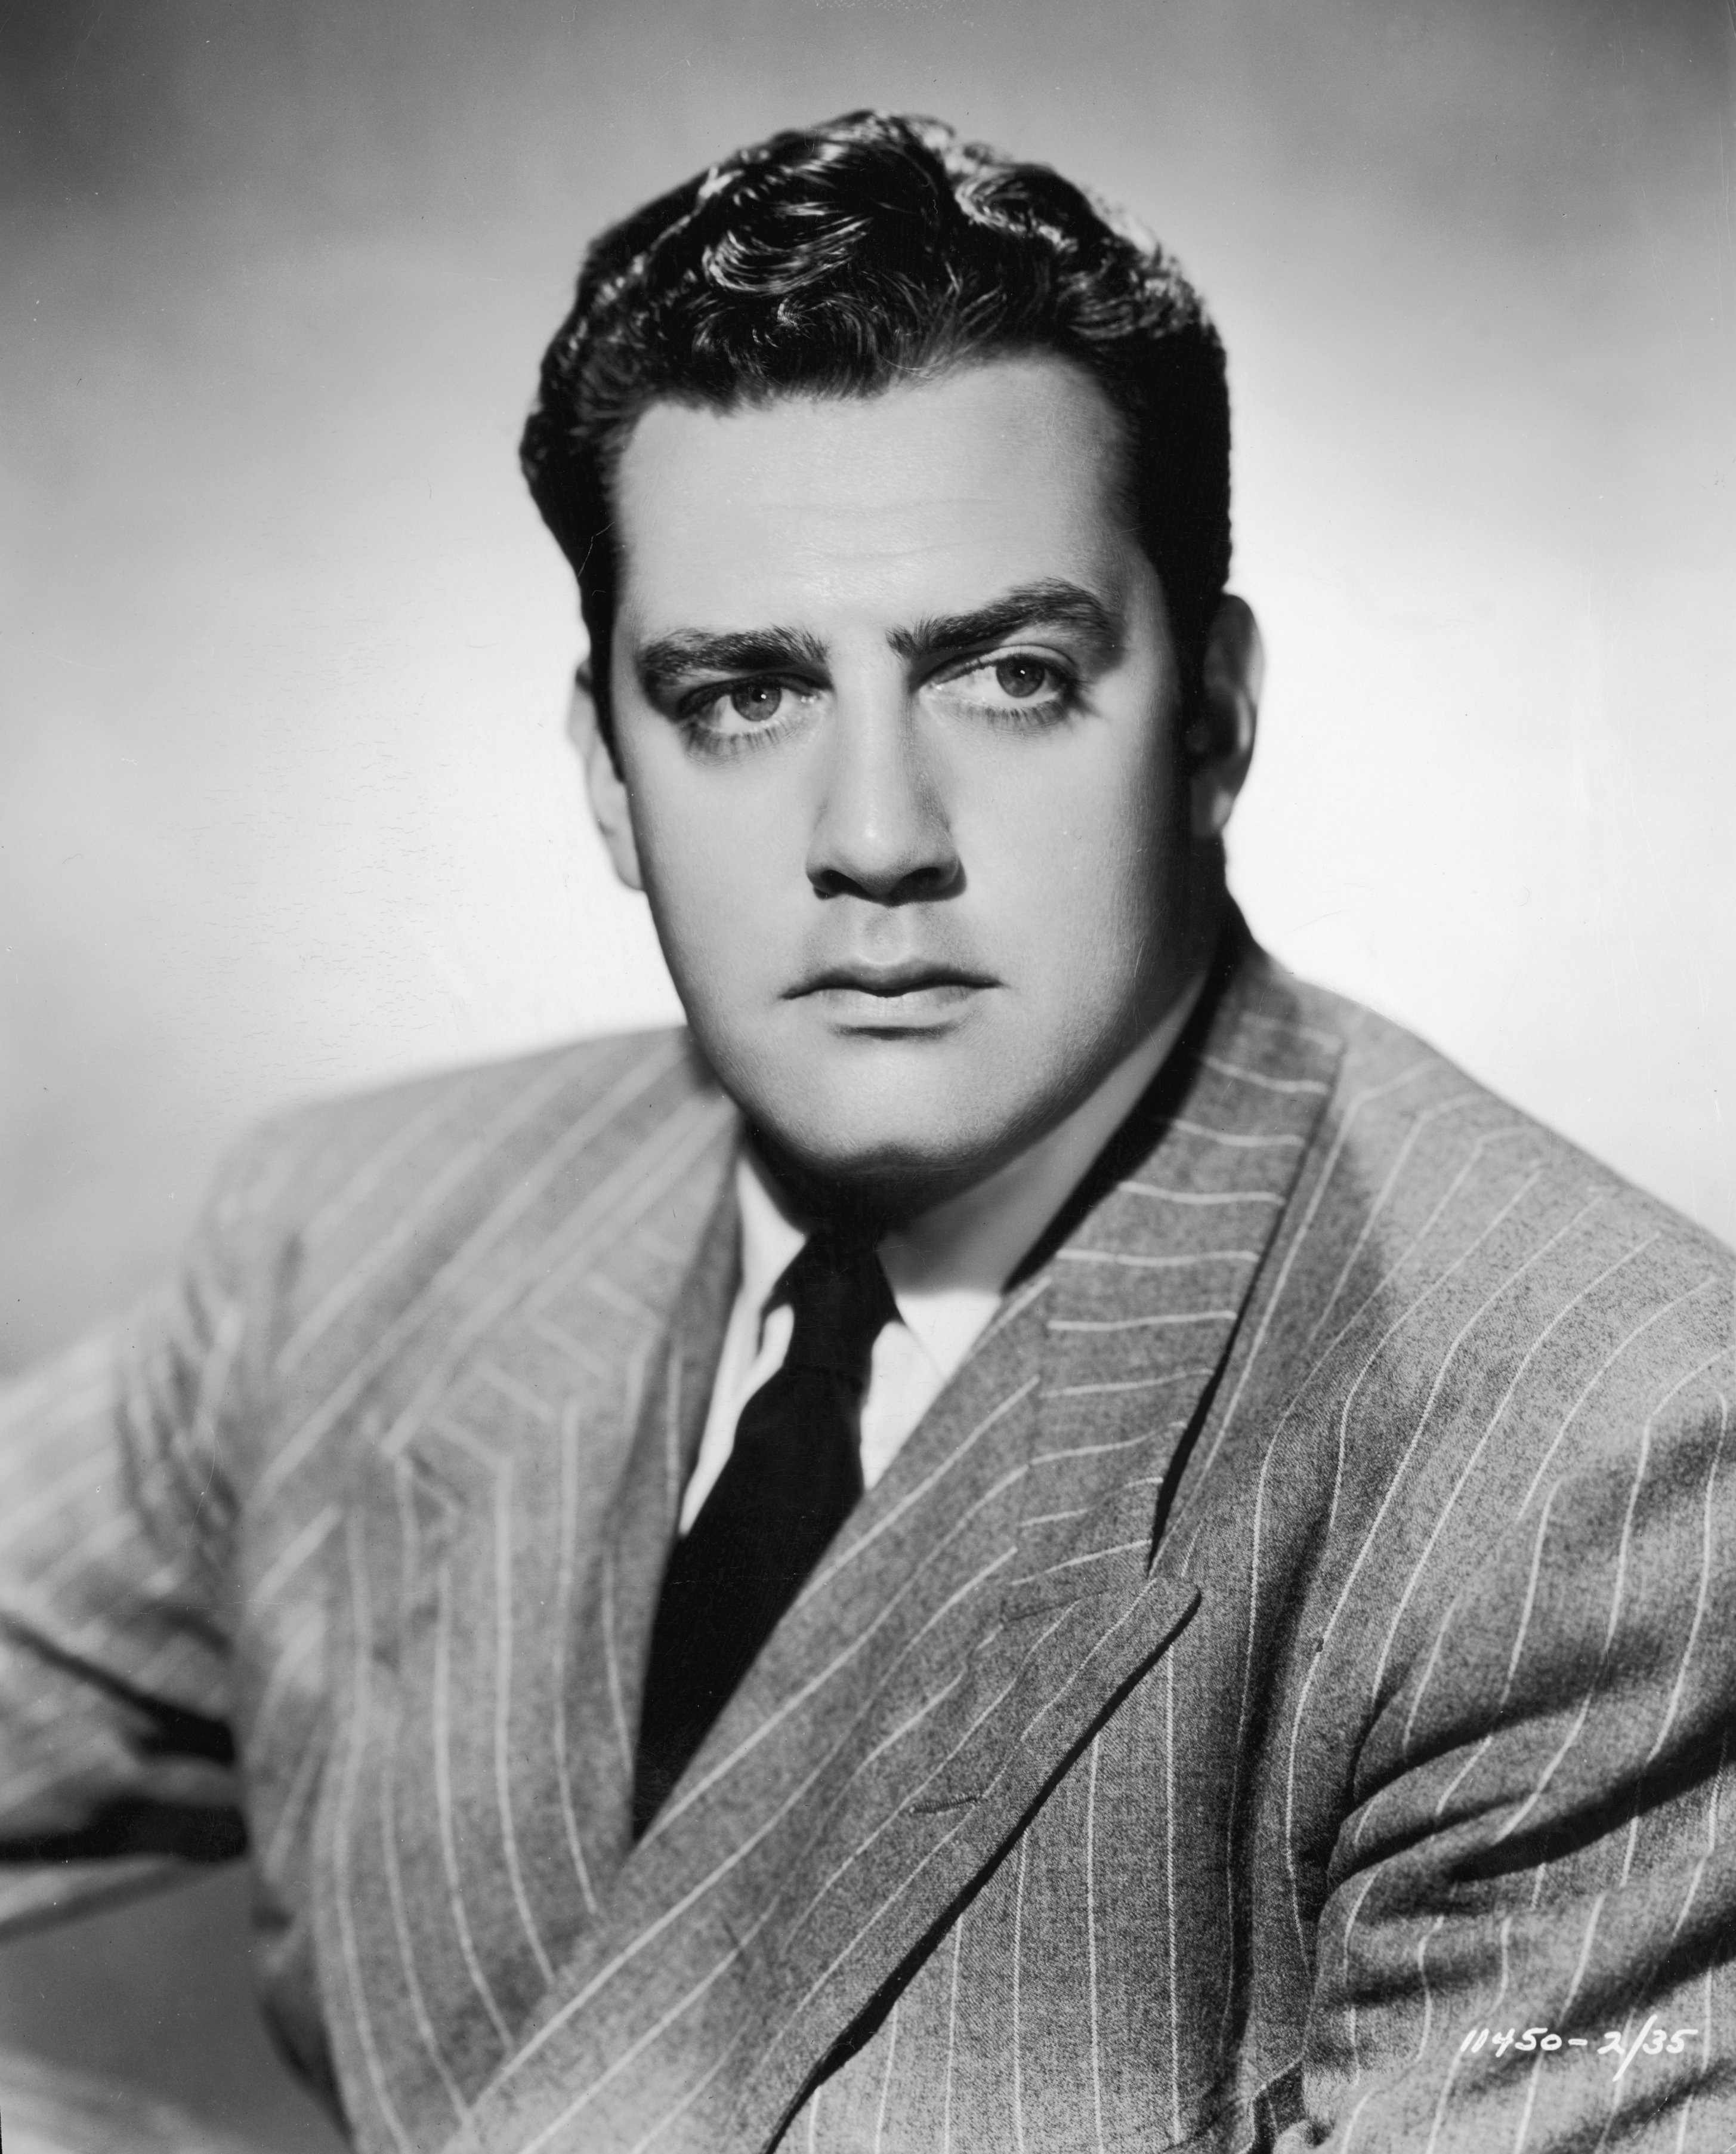 Raymond Burr wearing a pinstriped suit in a promotional headshot for the film, "Bride of Vengeance." | Source: Getty Images